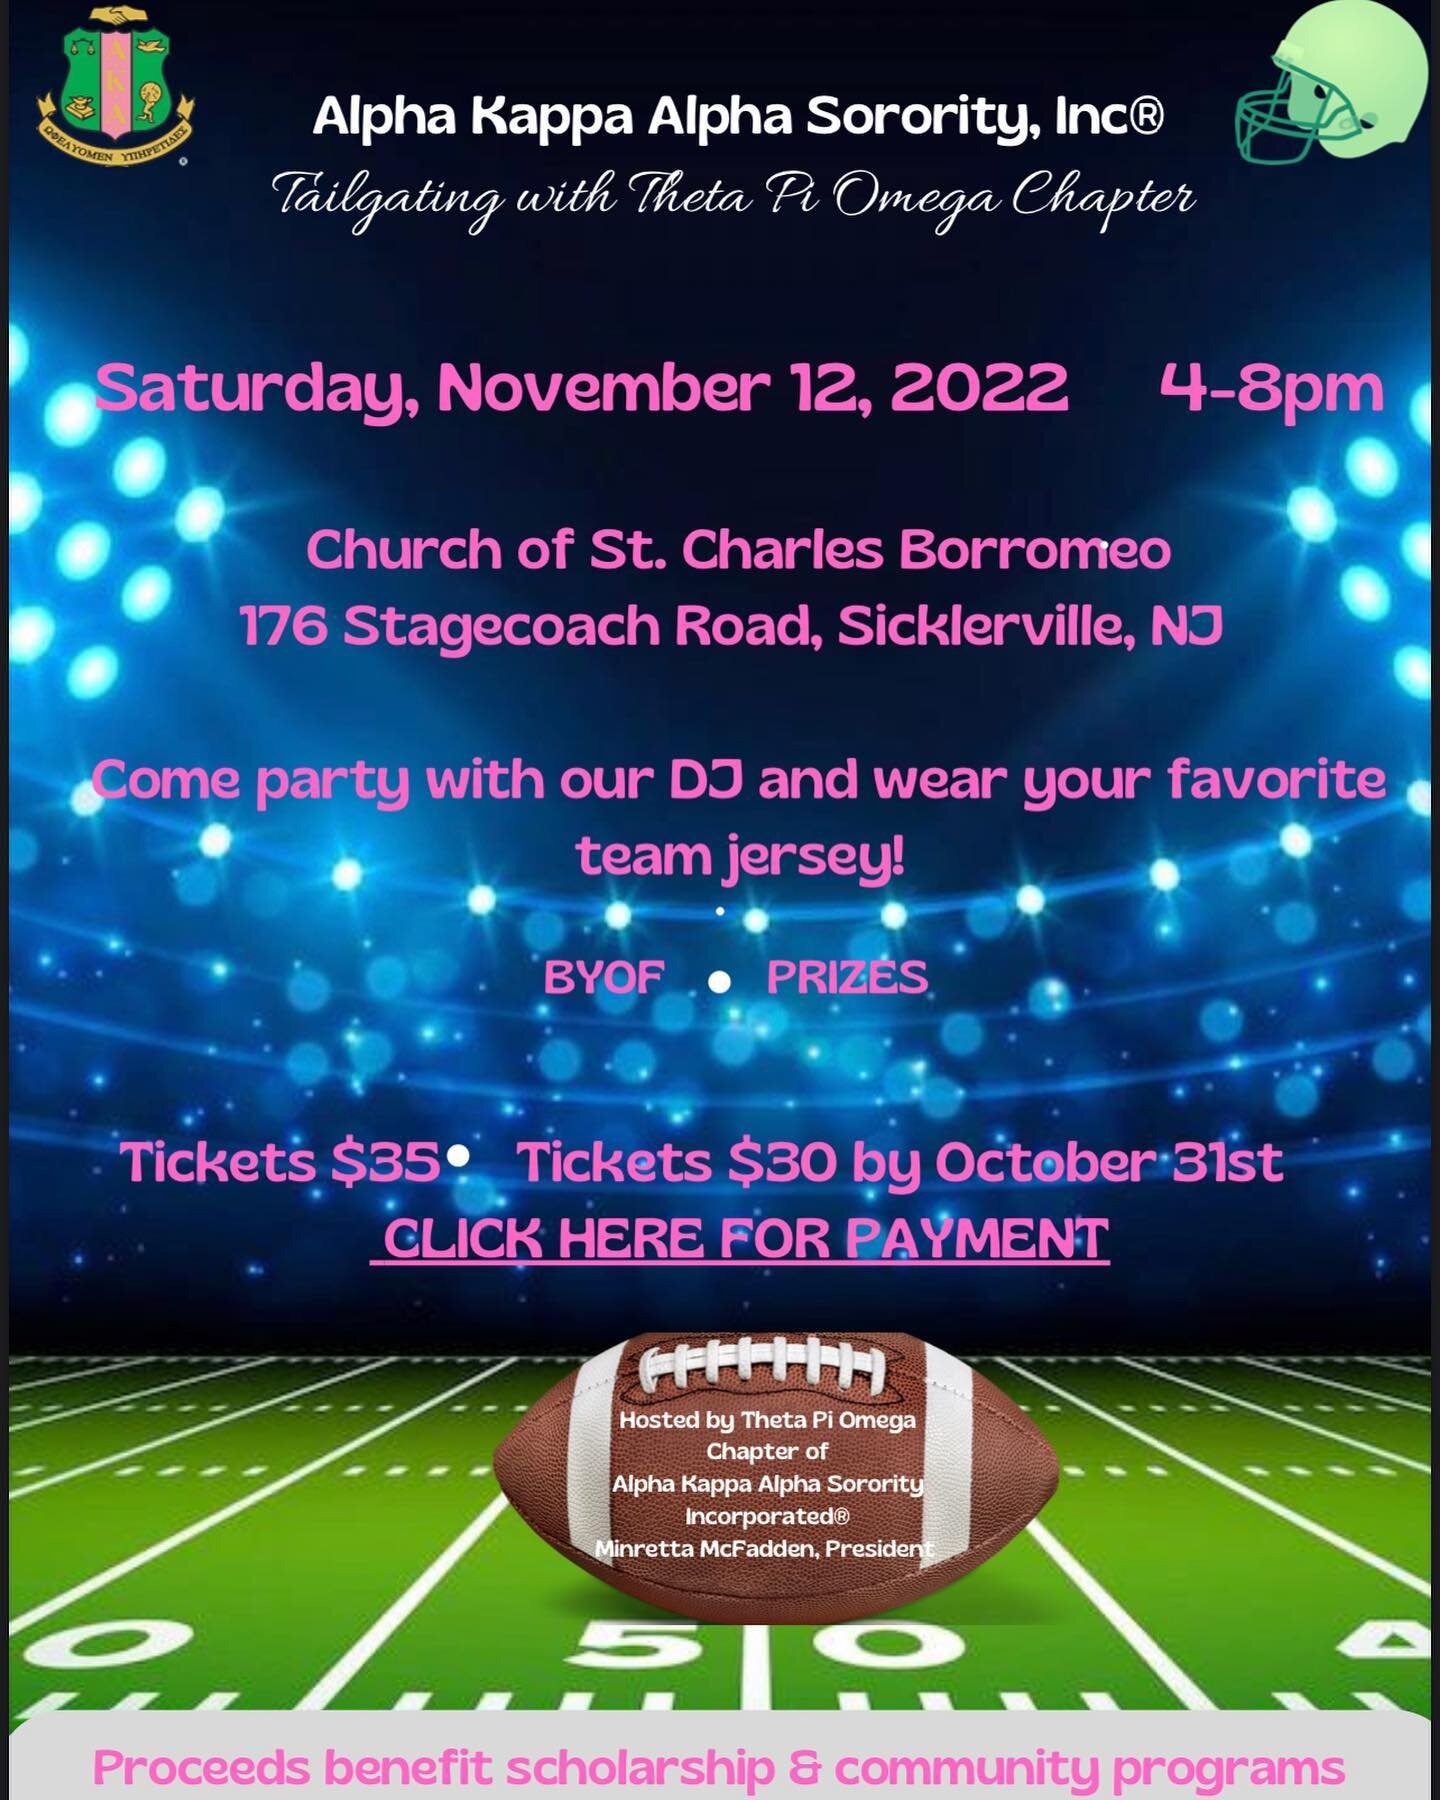 https://www.eventbrite.com/e/410199015297 💗💚🏈 Join the lovely ladies of Theta Pi Omega and wear your favorite sports team jersey as we enjoy a day of food, music and prizes! #tailgating #southjersey #aka1908 #nar1908 #thetapiomega